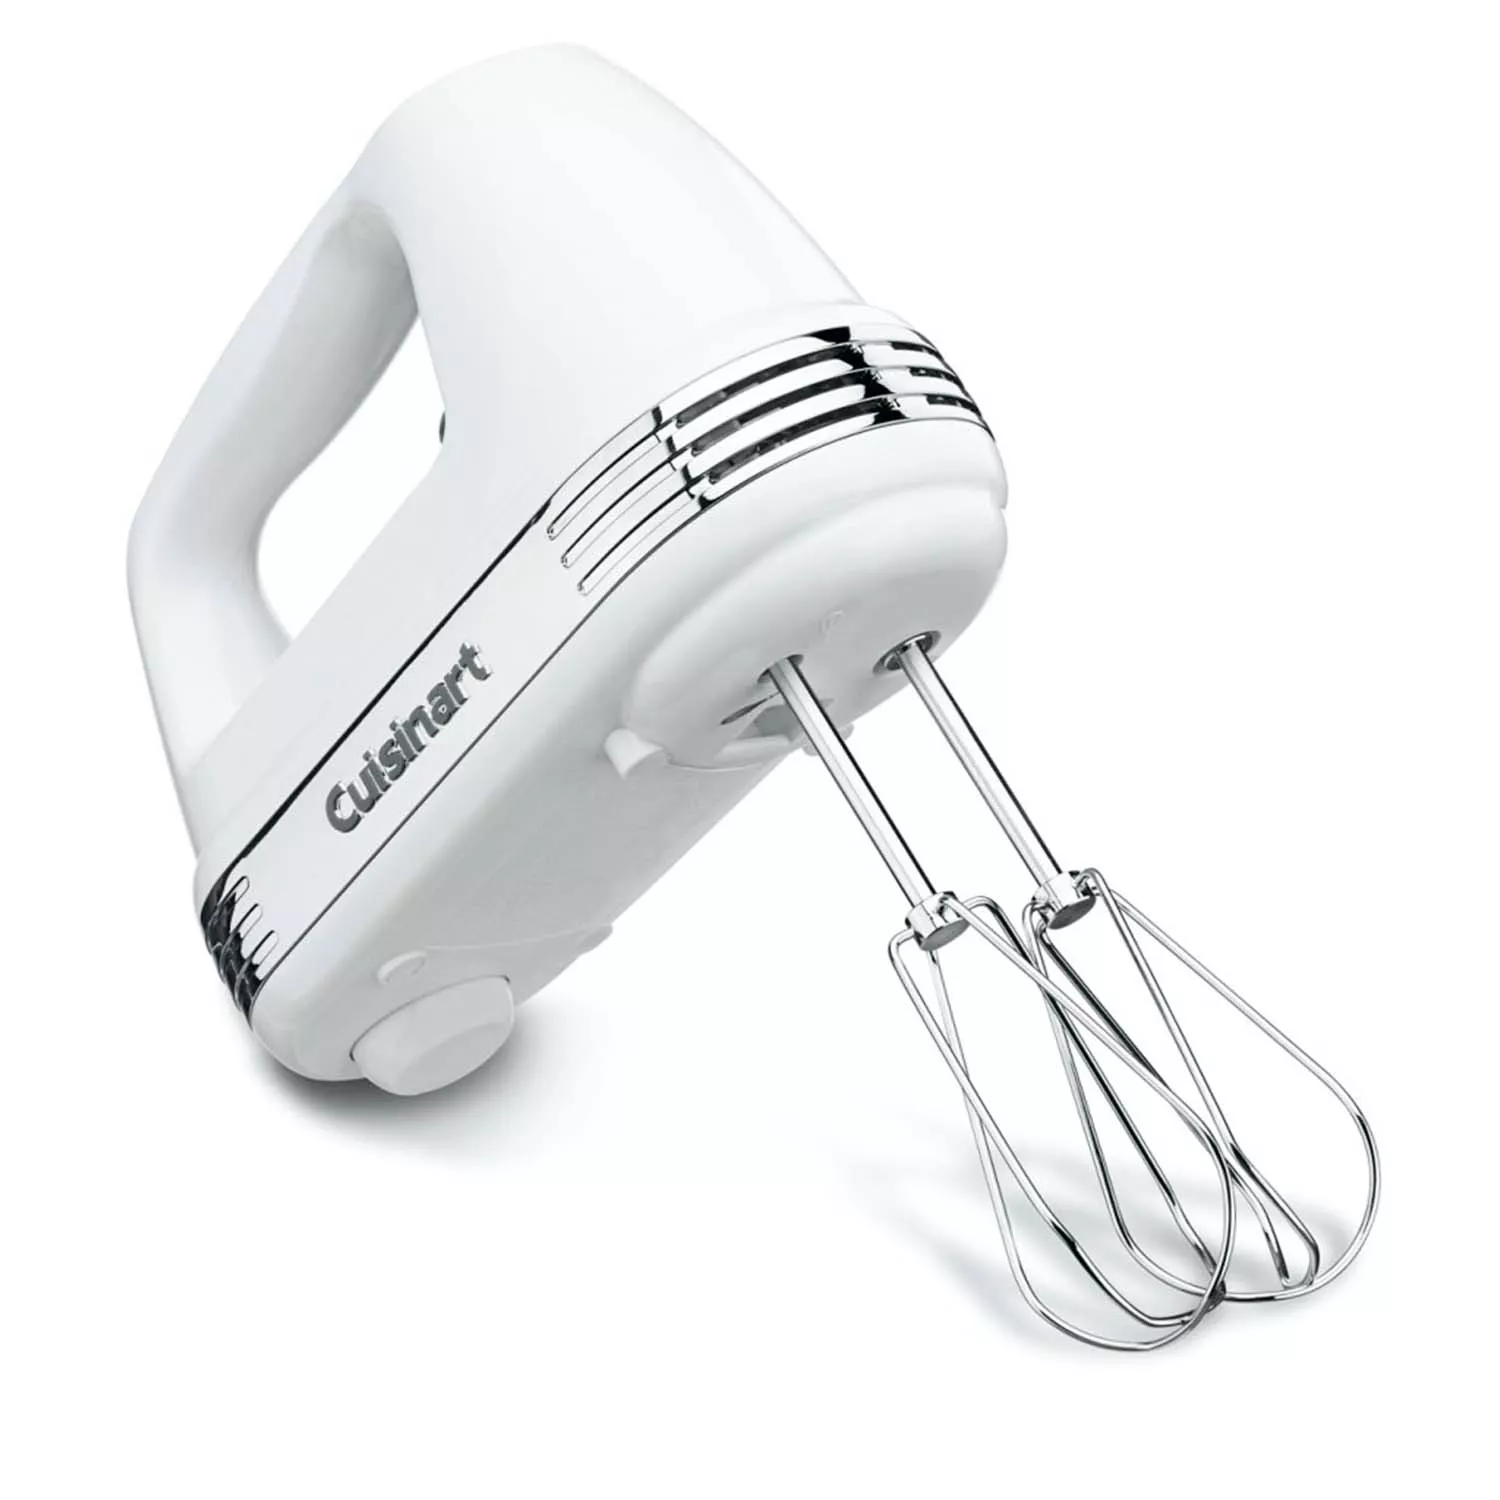 Cuisinart HM-70 Power Advantage 7-Speed Hand Mixer, Stainless and White 